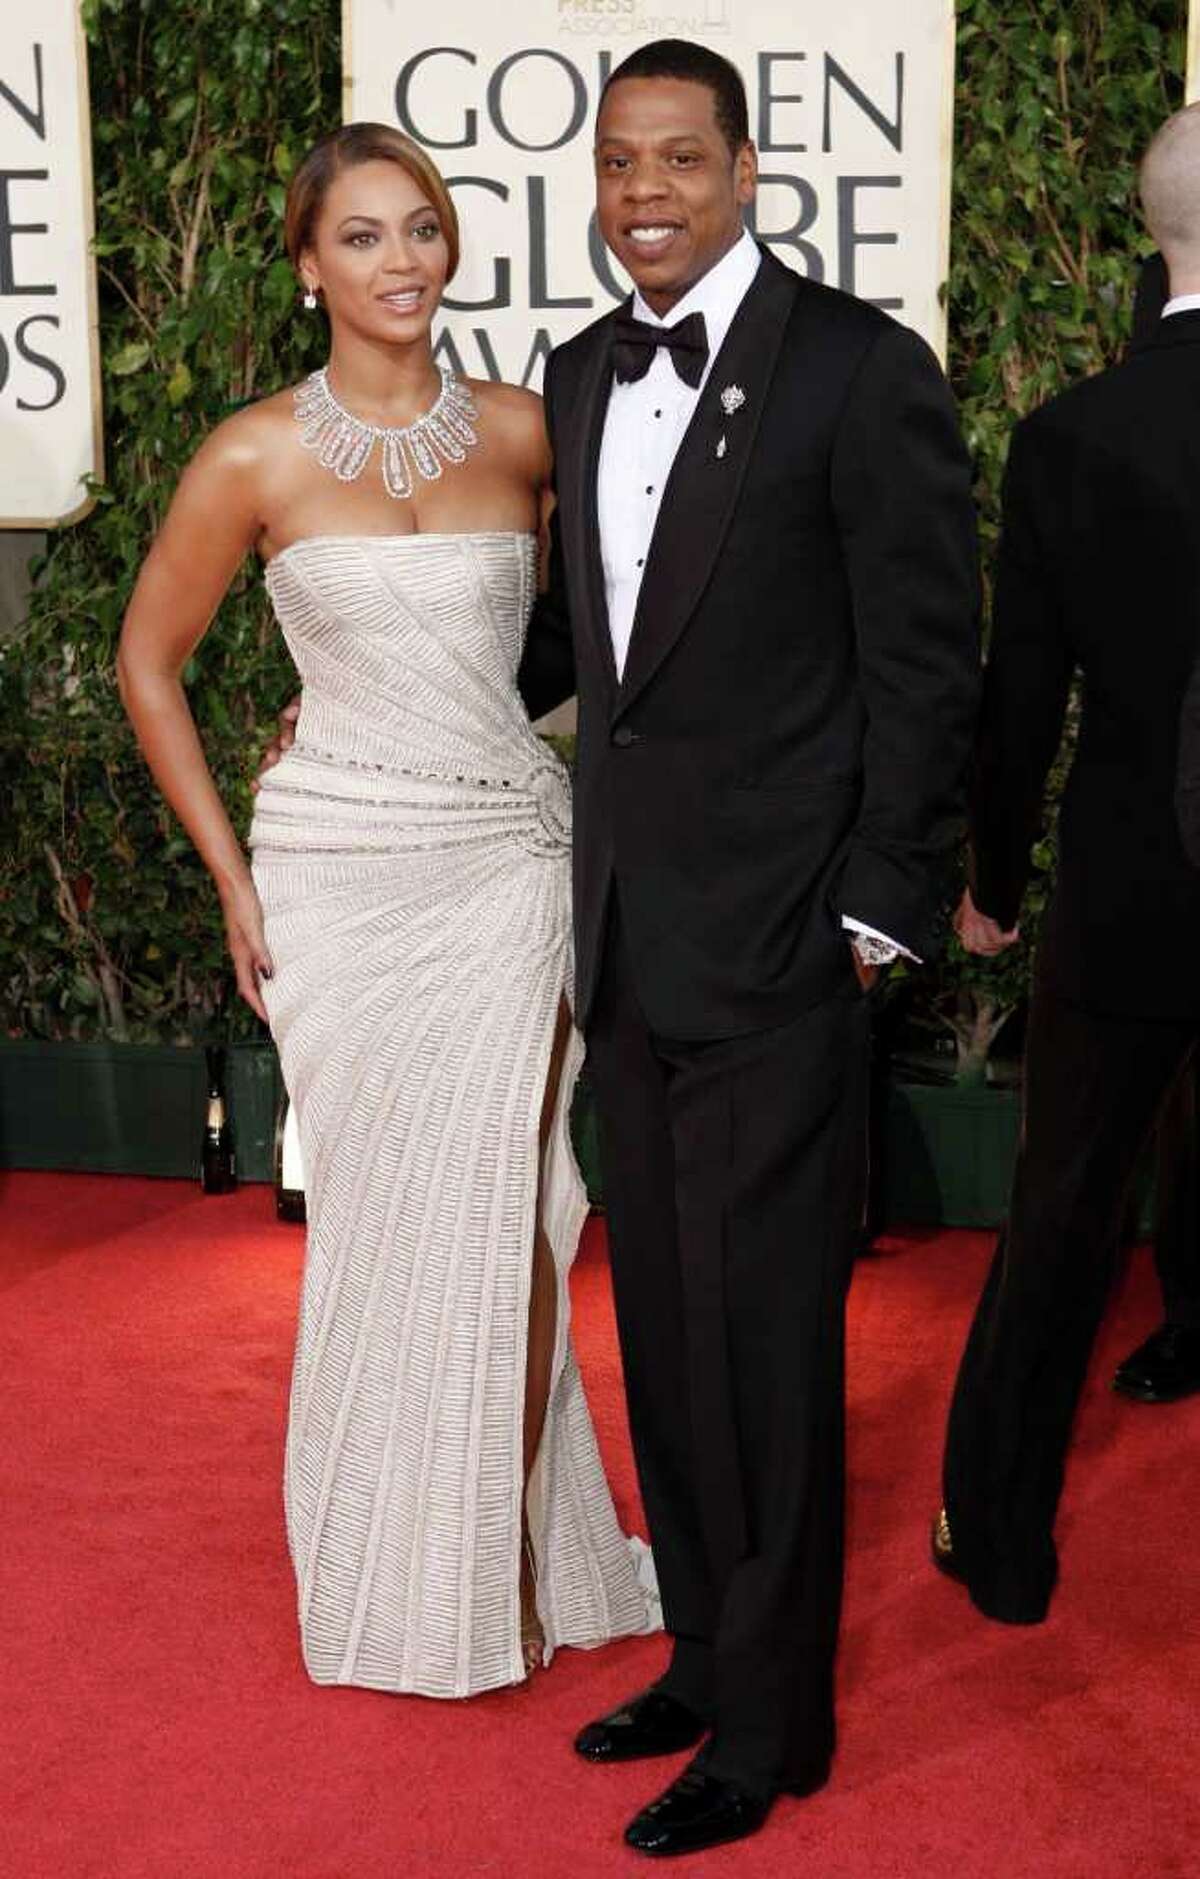 FILE - In this Jan. 11, 2009 file photo, Beyonce, left, is joined by husband Jay-Z, as she arrives at the 66th Annual Golden Globe Awards in Beverly Hills, Calif. Through a rap verse, Jay-Z has confirmed the birth of "the most beautiful girl in the world" _ his newborn daughter. The song "Glory" made its debut on his social website Monday, Jan. 9, 2012, two days after he and Beyonce reportedly gave birth to a daughter, Blue Ivy. (AP Photo/Matt Sayles, file)